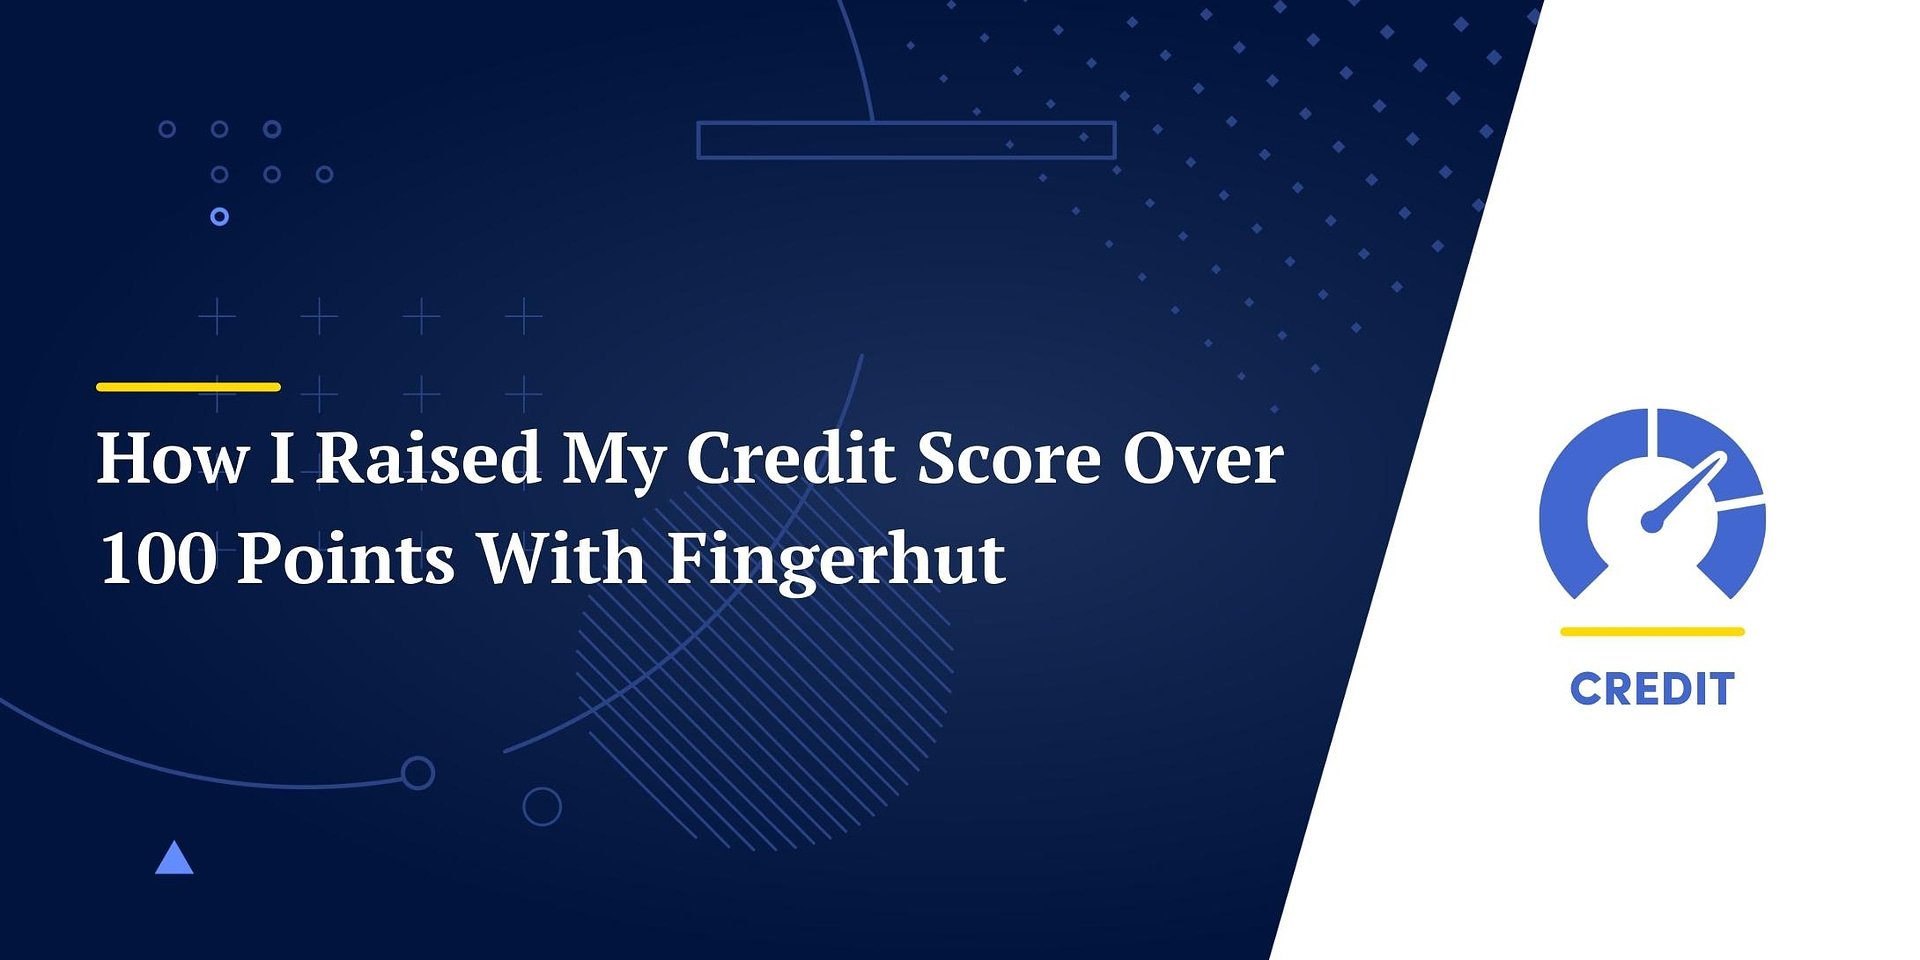 How To Increase Fingerhut Credit Limit